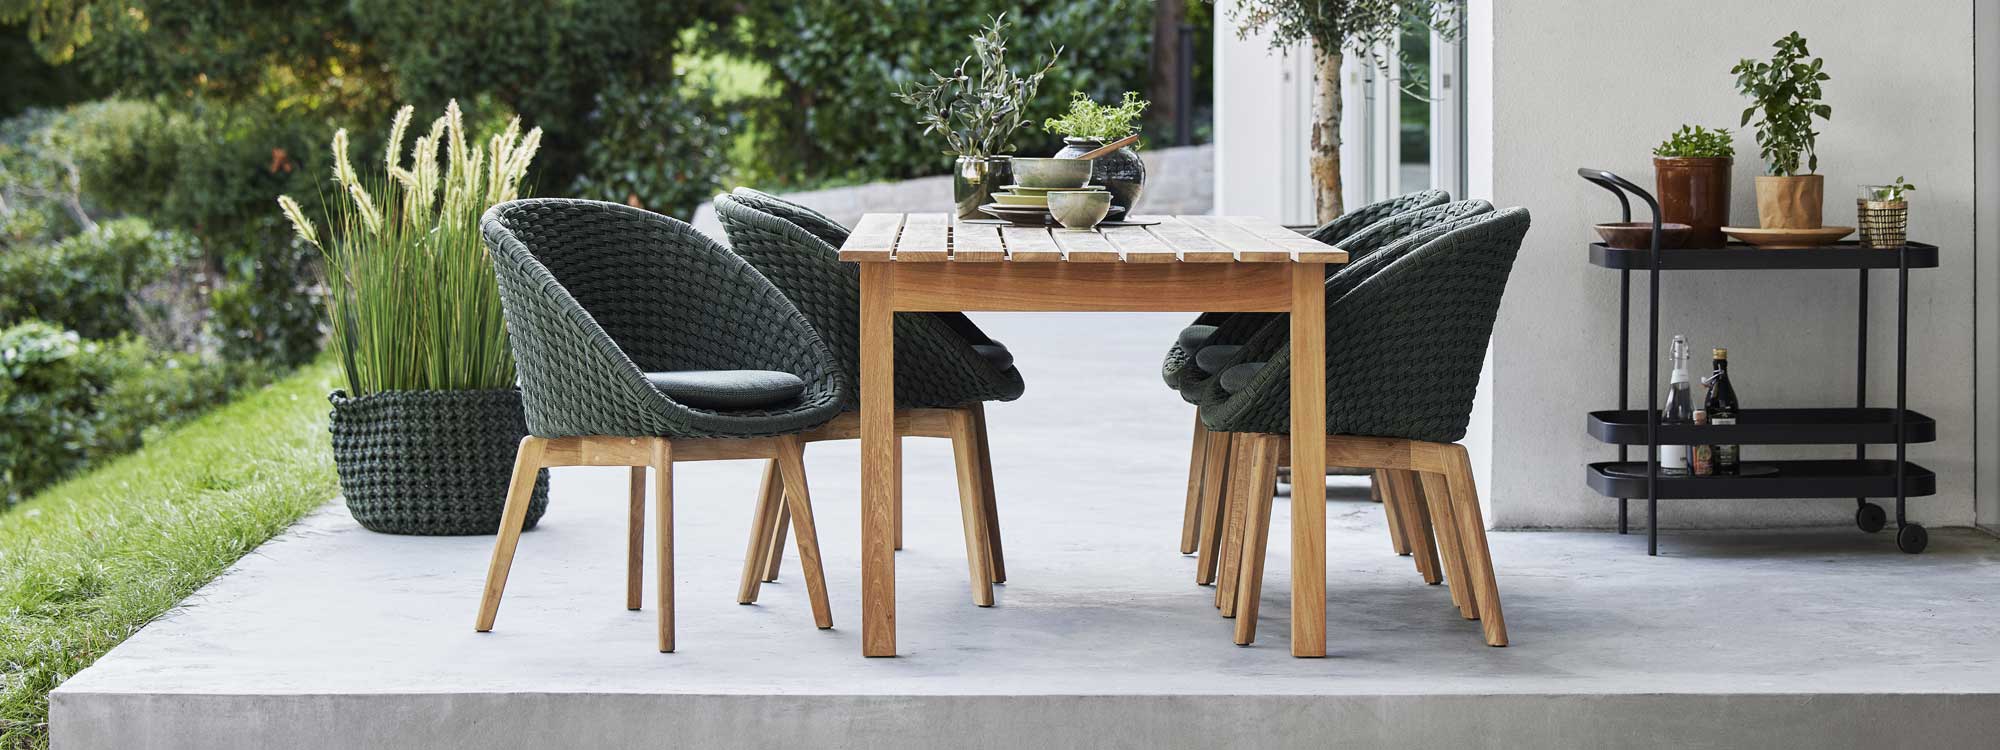 Image of Grace teak dining table and Peacock tub chairs on terrace by Cane-line garden furniture